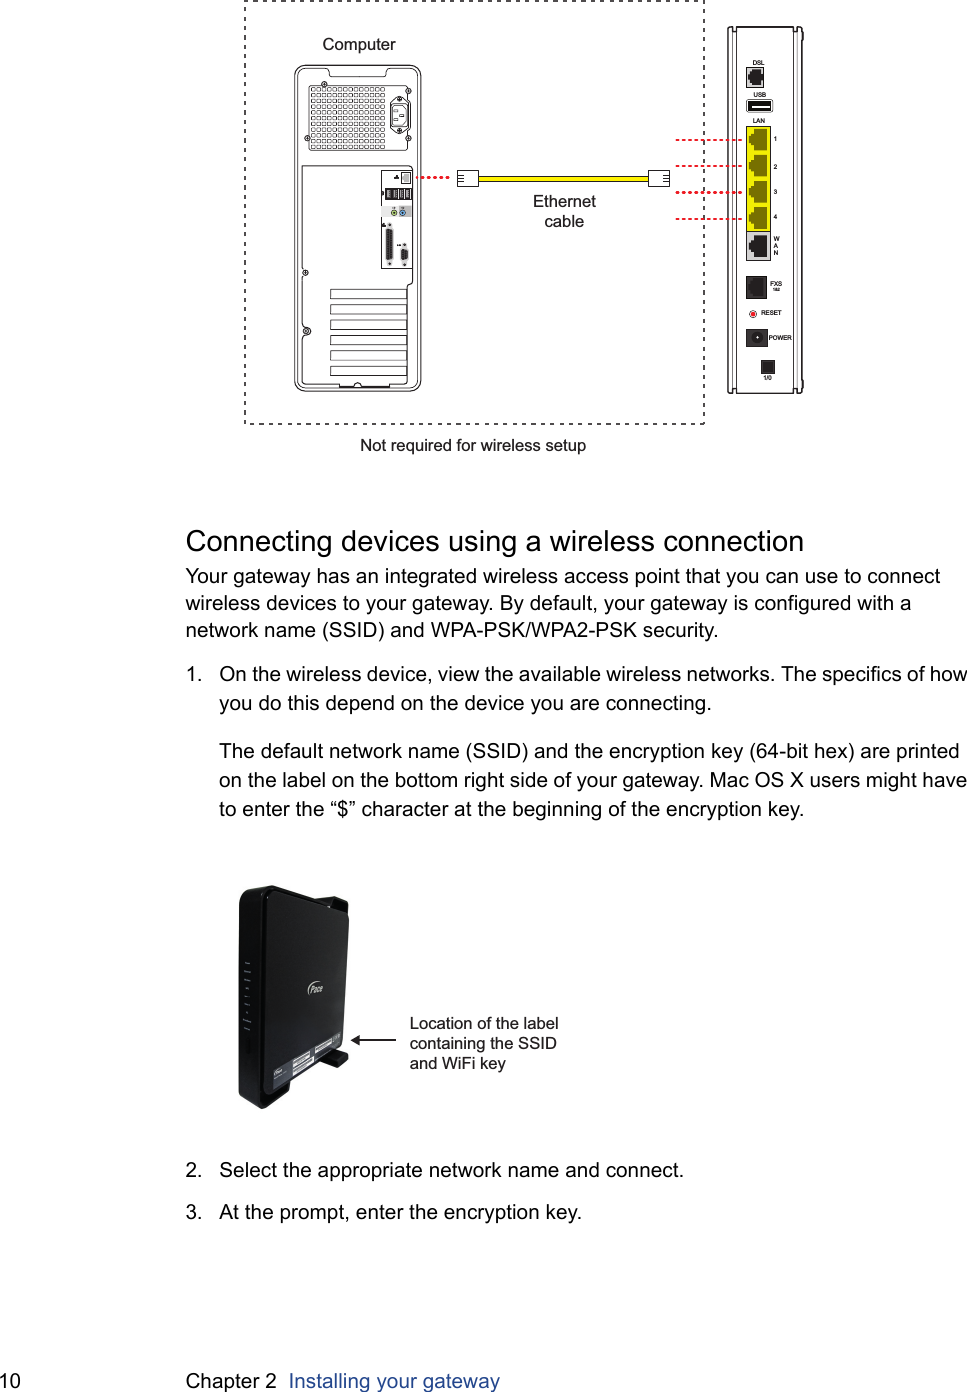 10 Chapter 2  Installing your gatewayConnecting devices using a wireless connectionYour gateway has an integrated wireless access point that you can use to connect wireless devices to your gateway. By default, your gateway is configured with a network name (SSID) and WPA-PSK/WPA2-PSK security.1. On the wireless device, view the available wireless networks. The specifics of how you do this depend on the device you are connecting.The default network name (SSID) and the encryption key (64-bit hex) are printed on the label on the bottom right side of your gateway. Mac OS X users might have to enter the “$” character at the beginning of the encryption key.2. Select the appropriate network name and connect.3. At the prompt, enter the encryption key.USBLAN1234WANDSLFXS1&amp;2RESETPOWER1/0EthernetcableComputerNot required for wireless setupLocation of the label containing the SSID and WiFi key